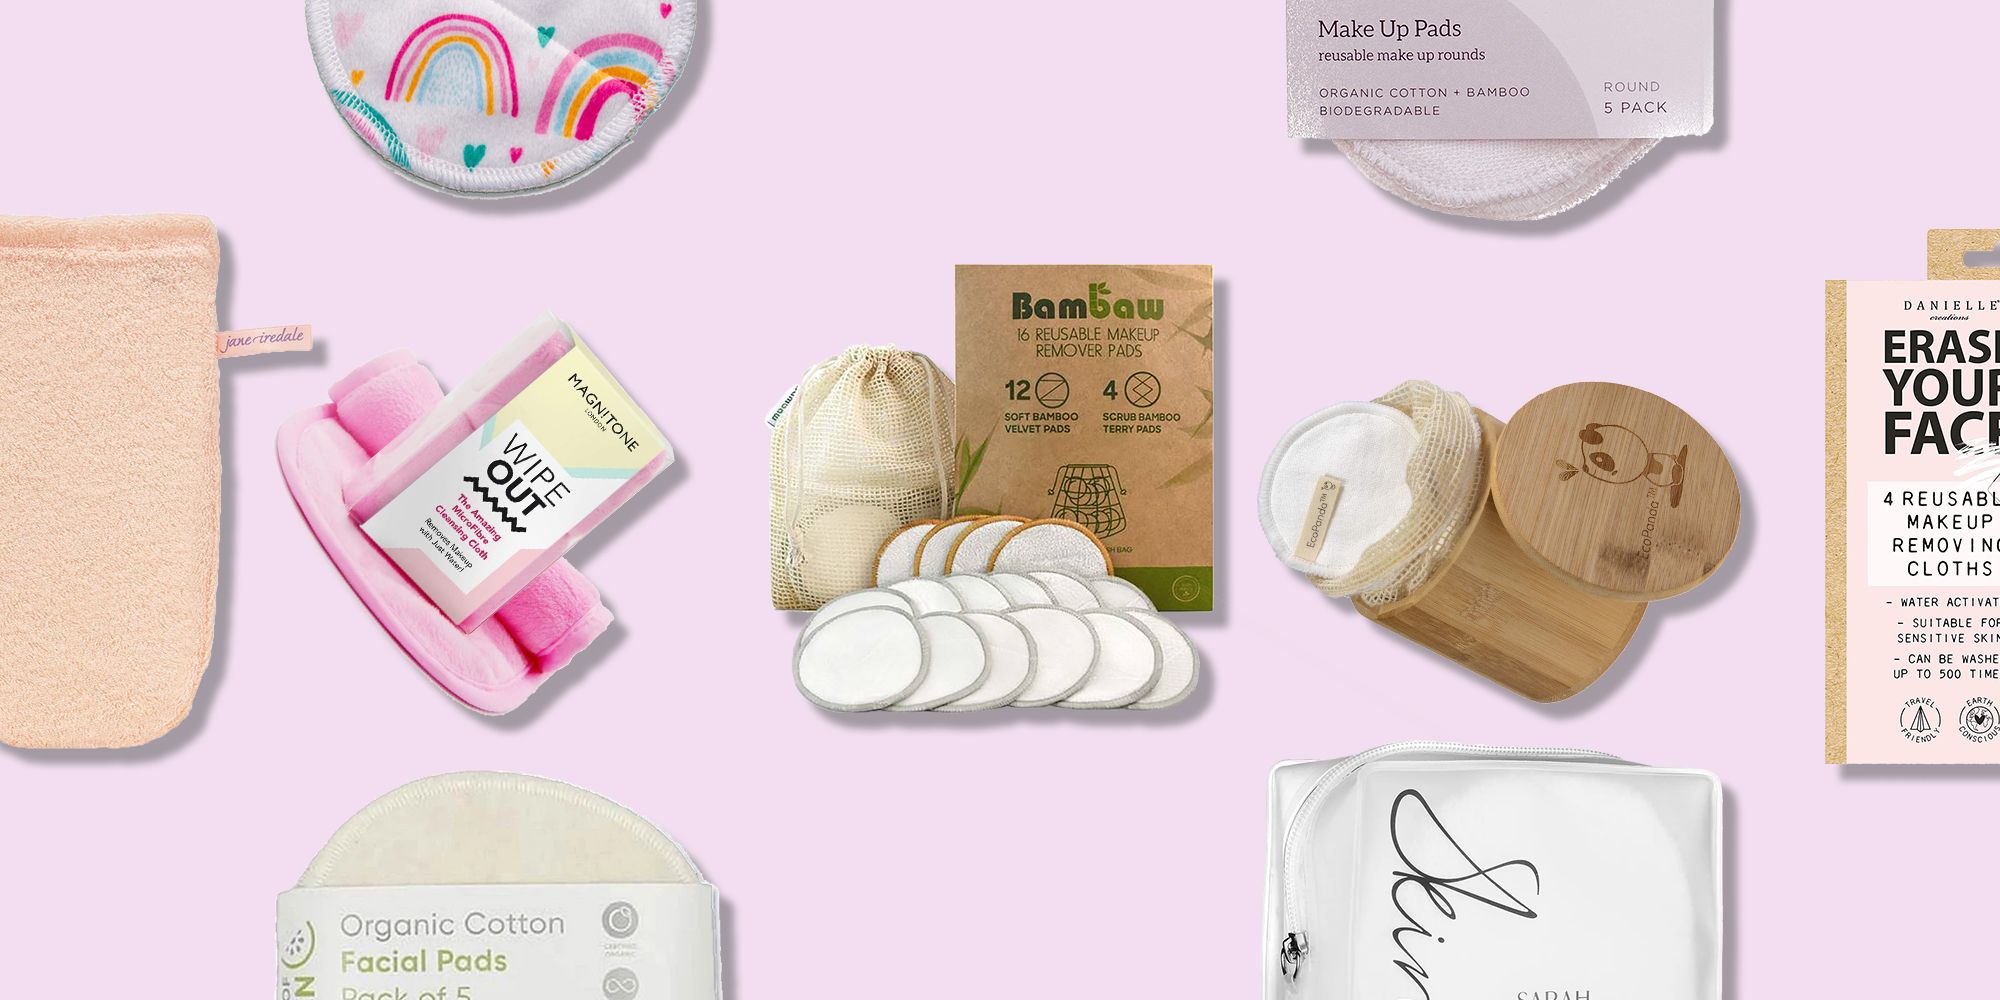 Best Reusable Make-Up Pads For All Skin